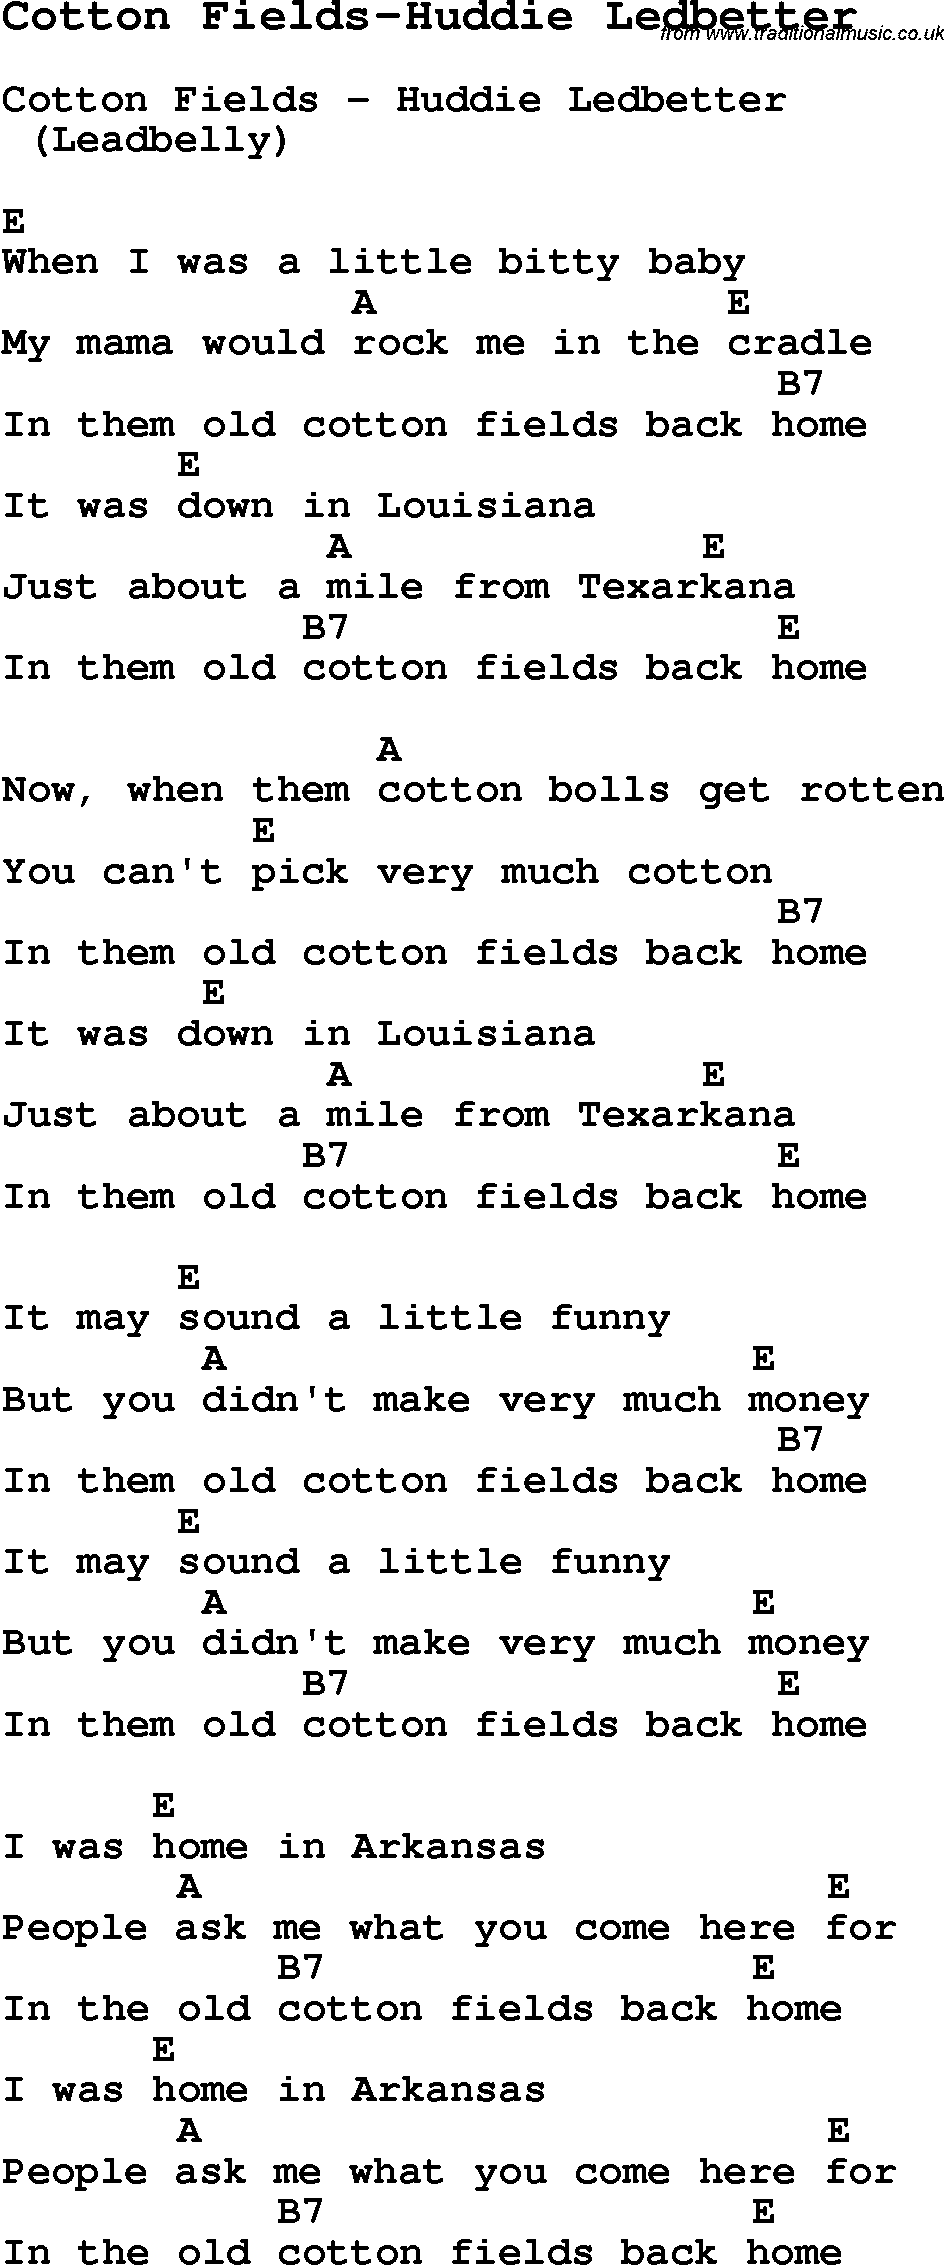 Blues Guitar Song, lyrics, chords, tablature, playing hints for Cotton Fields-Huddie Ledbetter